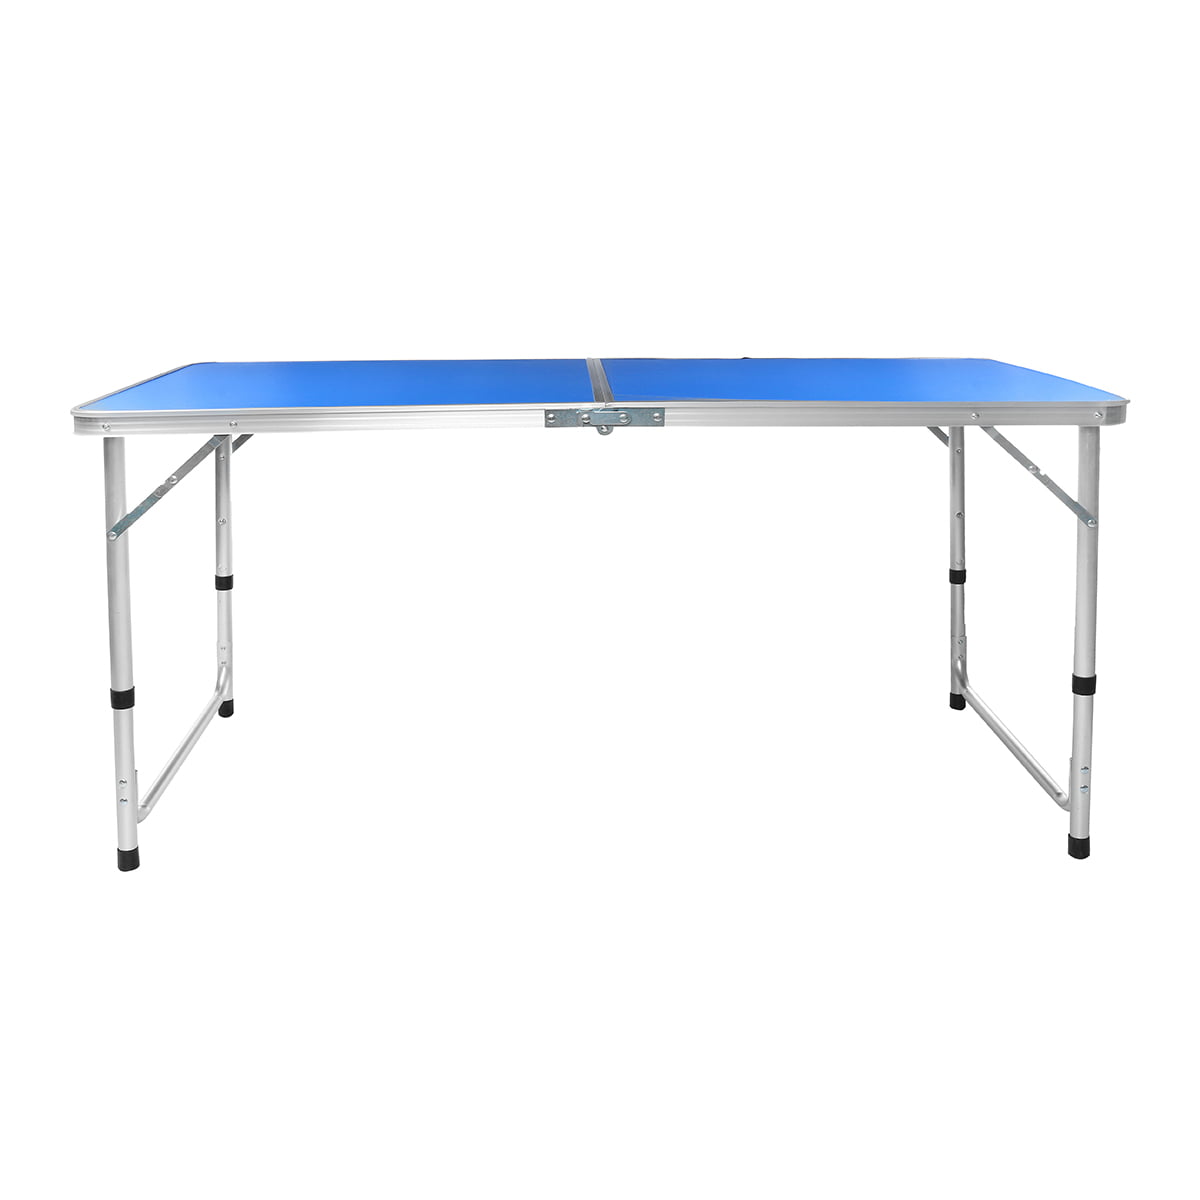 4FT 120 x 60CM HEAVY DUTY FOLDING TABLE PORTABLE CAMPING GARDEN PARTY CATERING